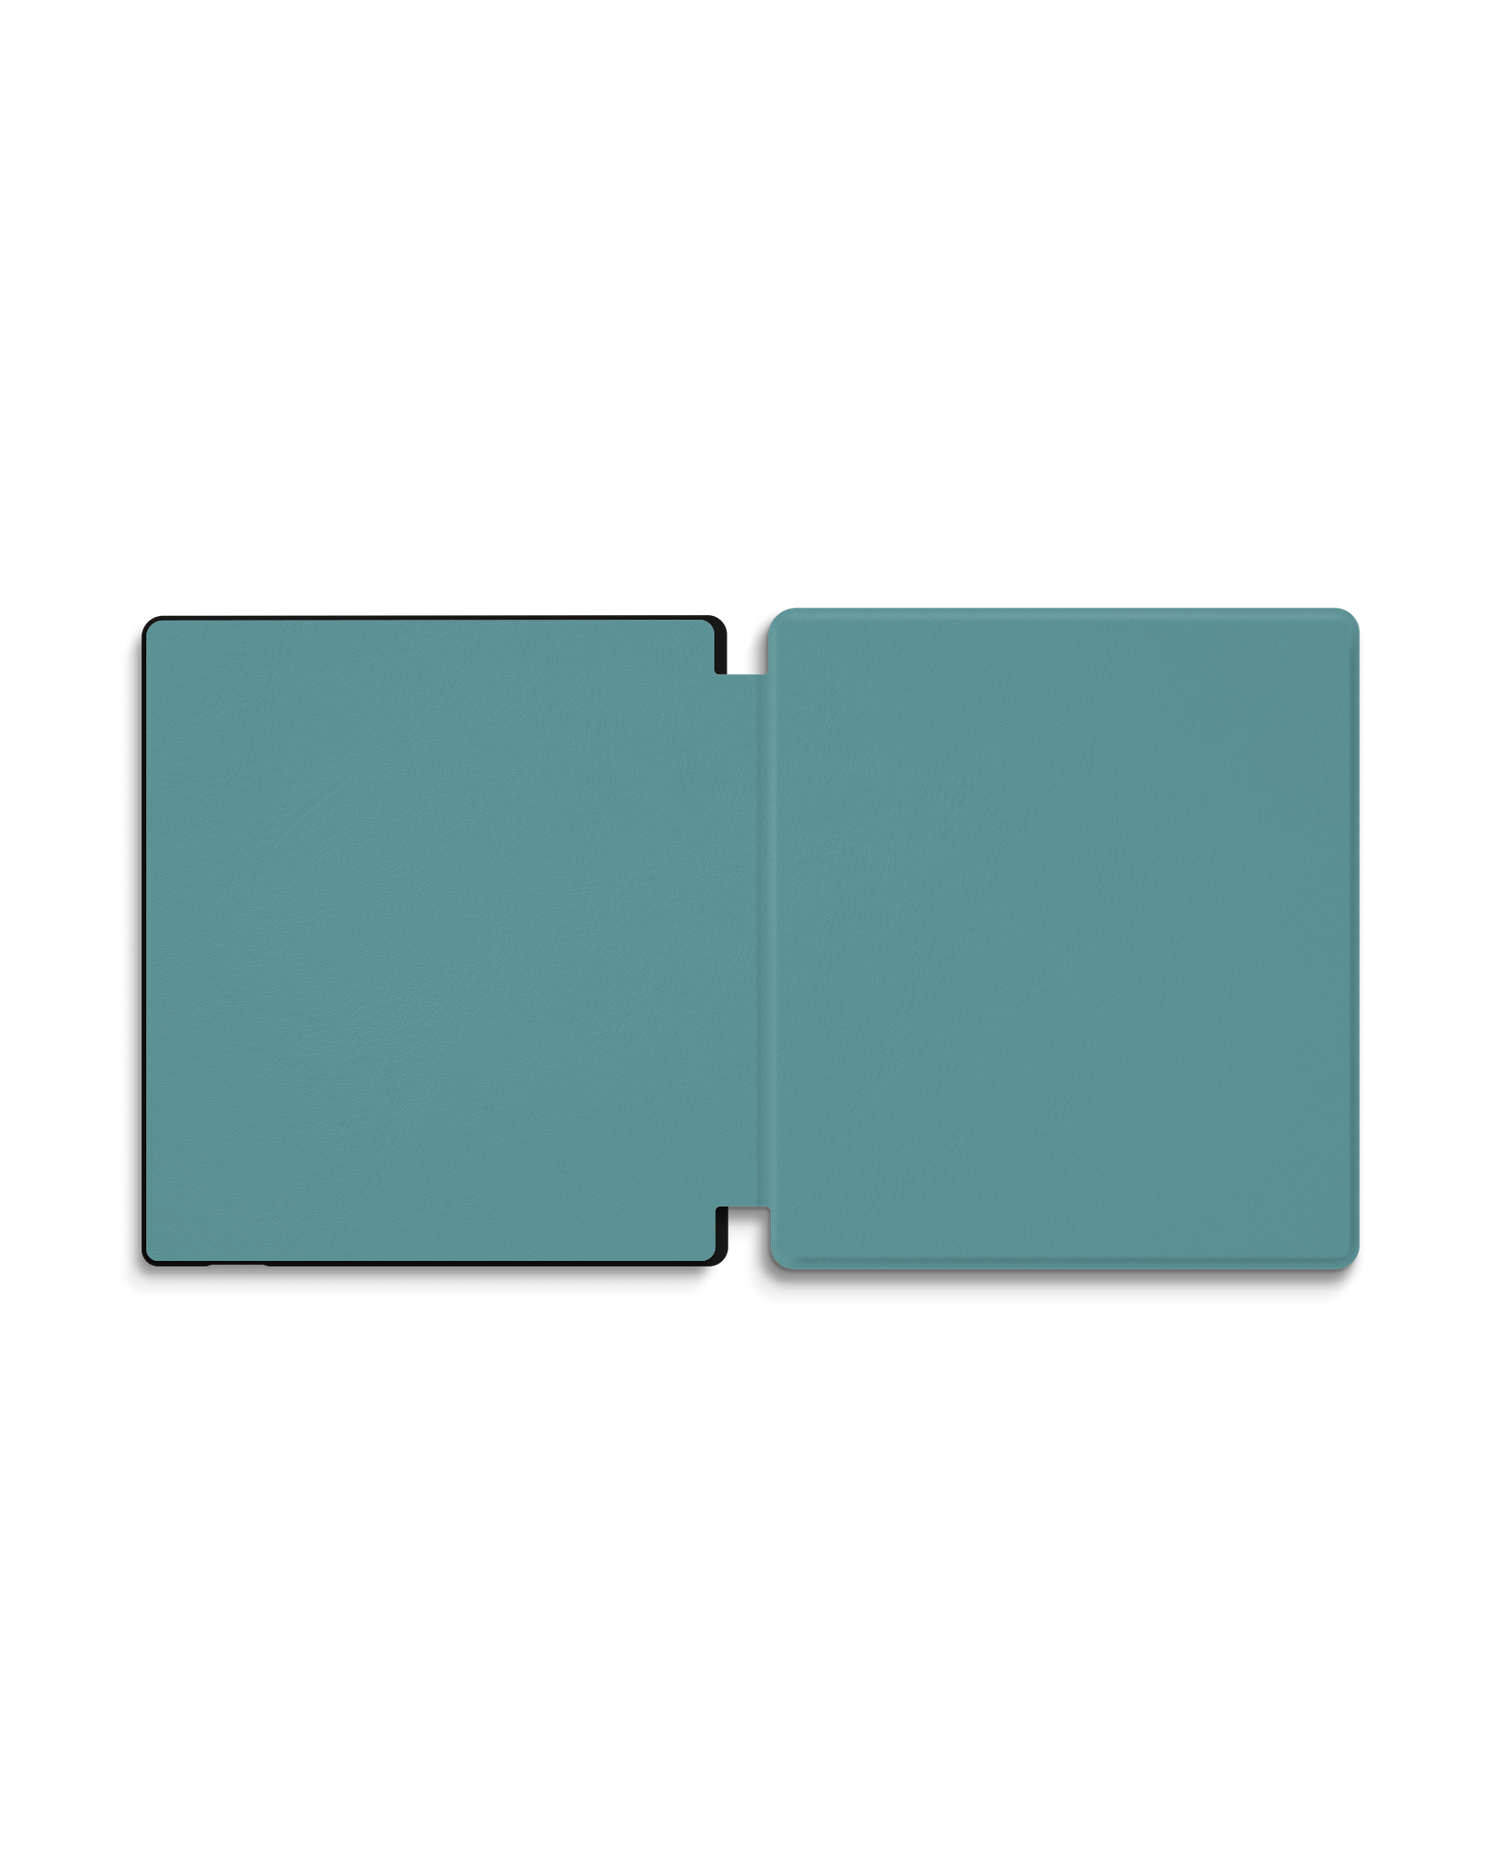 TURQUOISE eReader Smart Case for Amazon Kindle Oasis: Opened exterior view